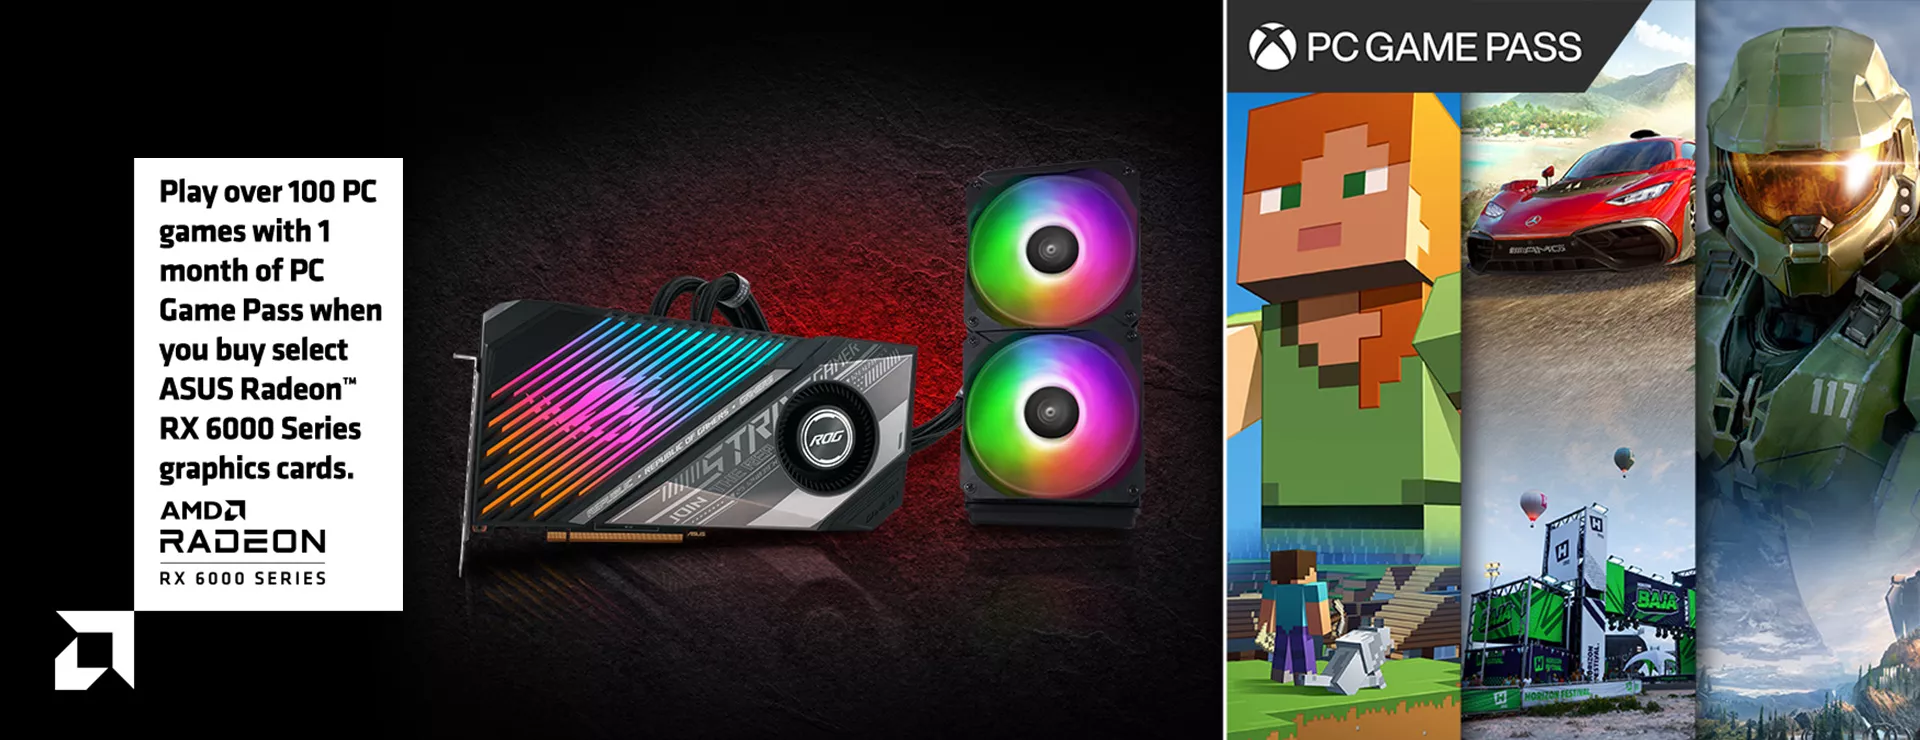 Front angle of ROG Strix LC Radeon RX 6950 XT OC Edition with game screenshot of Minecraft, Forze Horizon 5, and Halo Infinite